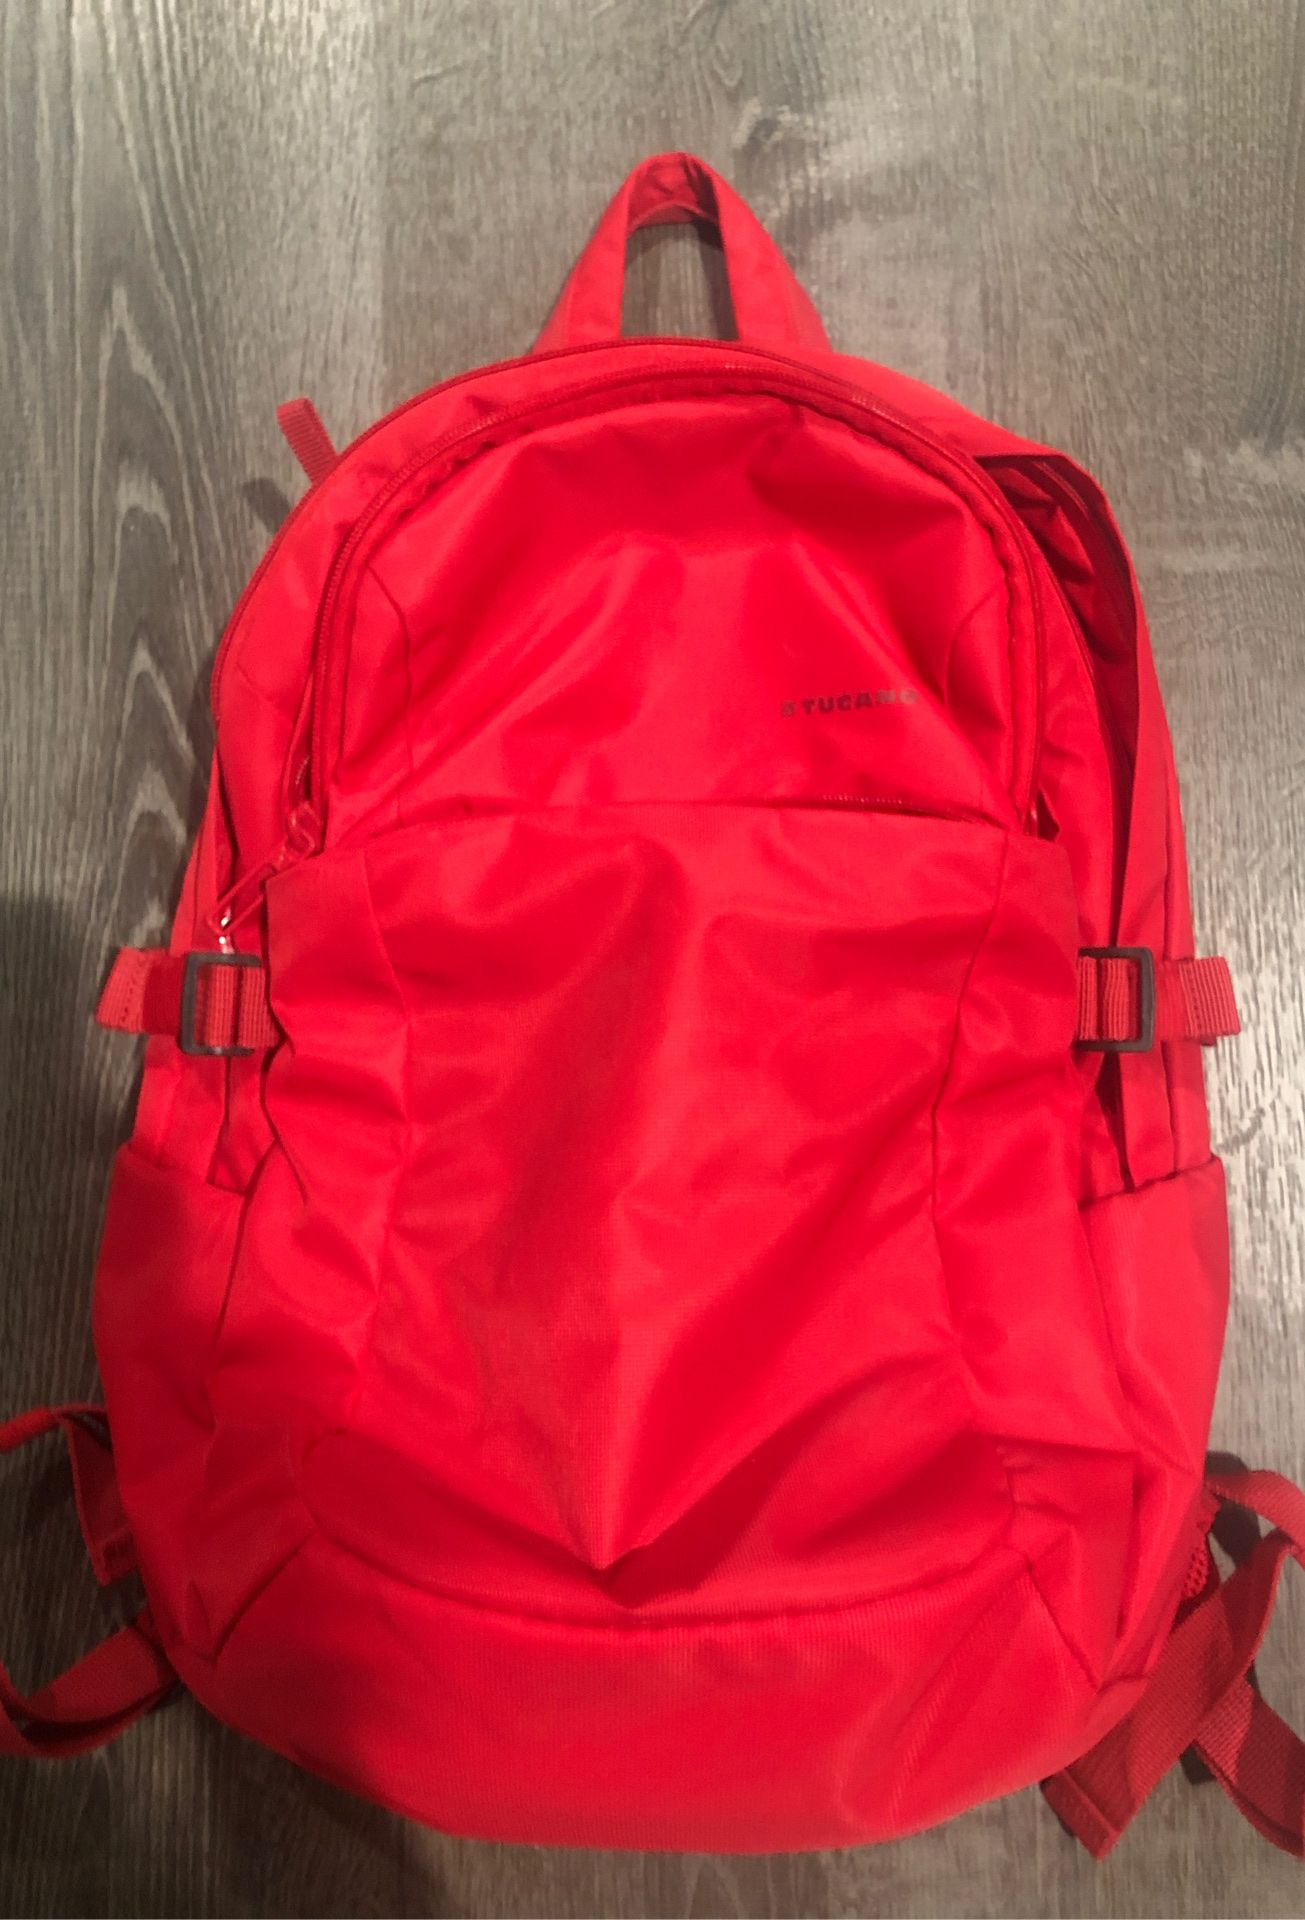 Tucano (Bravo backpack for MacBook Pro 15” and Laptop 15.6”)